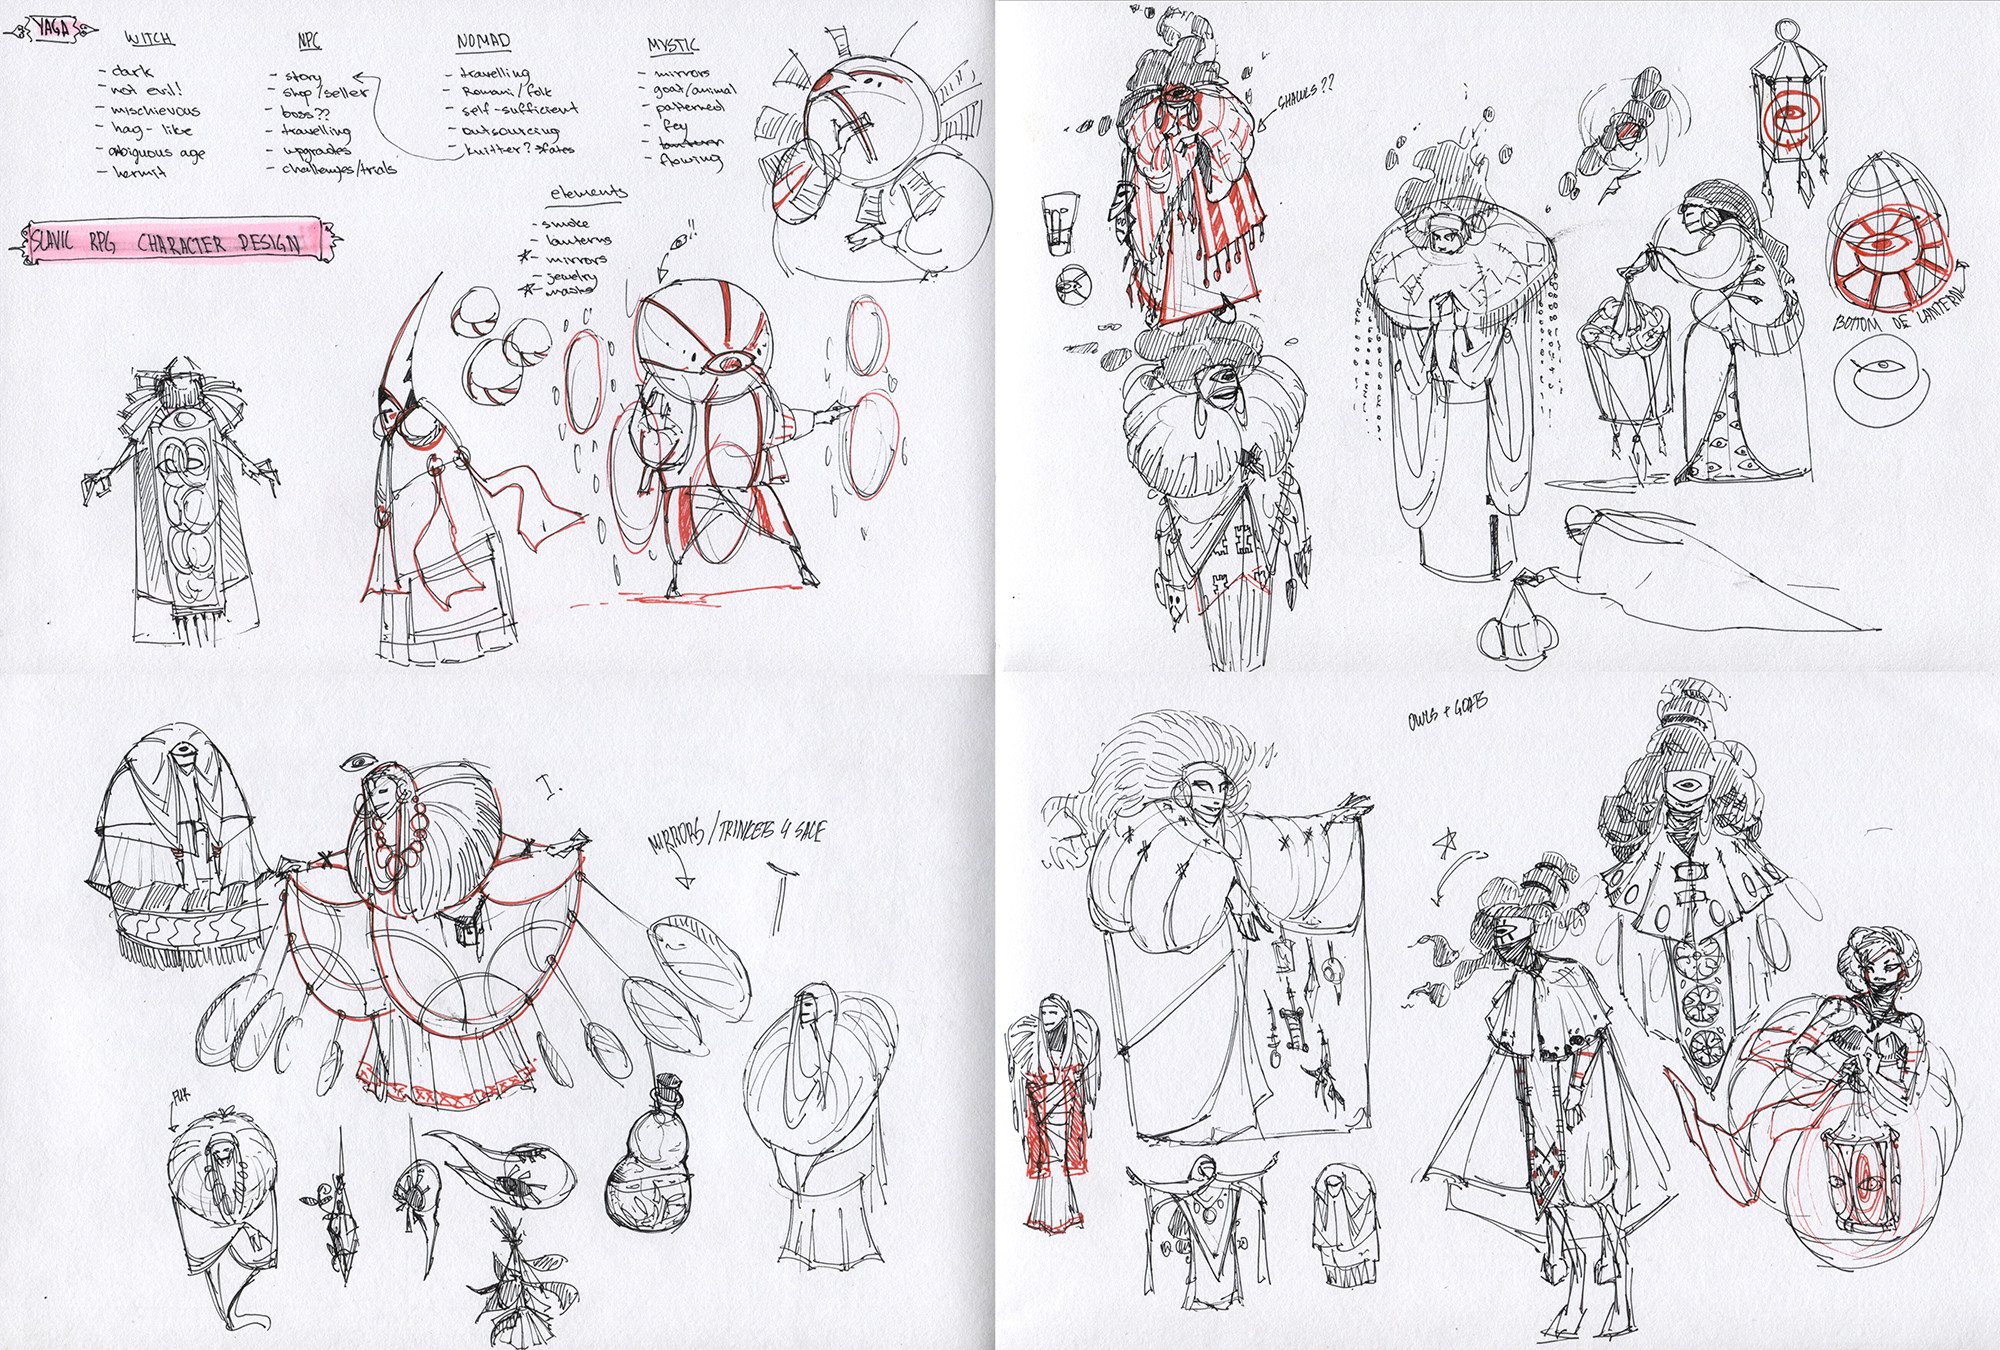 Initial sketchbook explorations &amp; themes